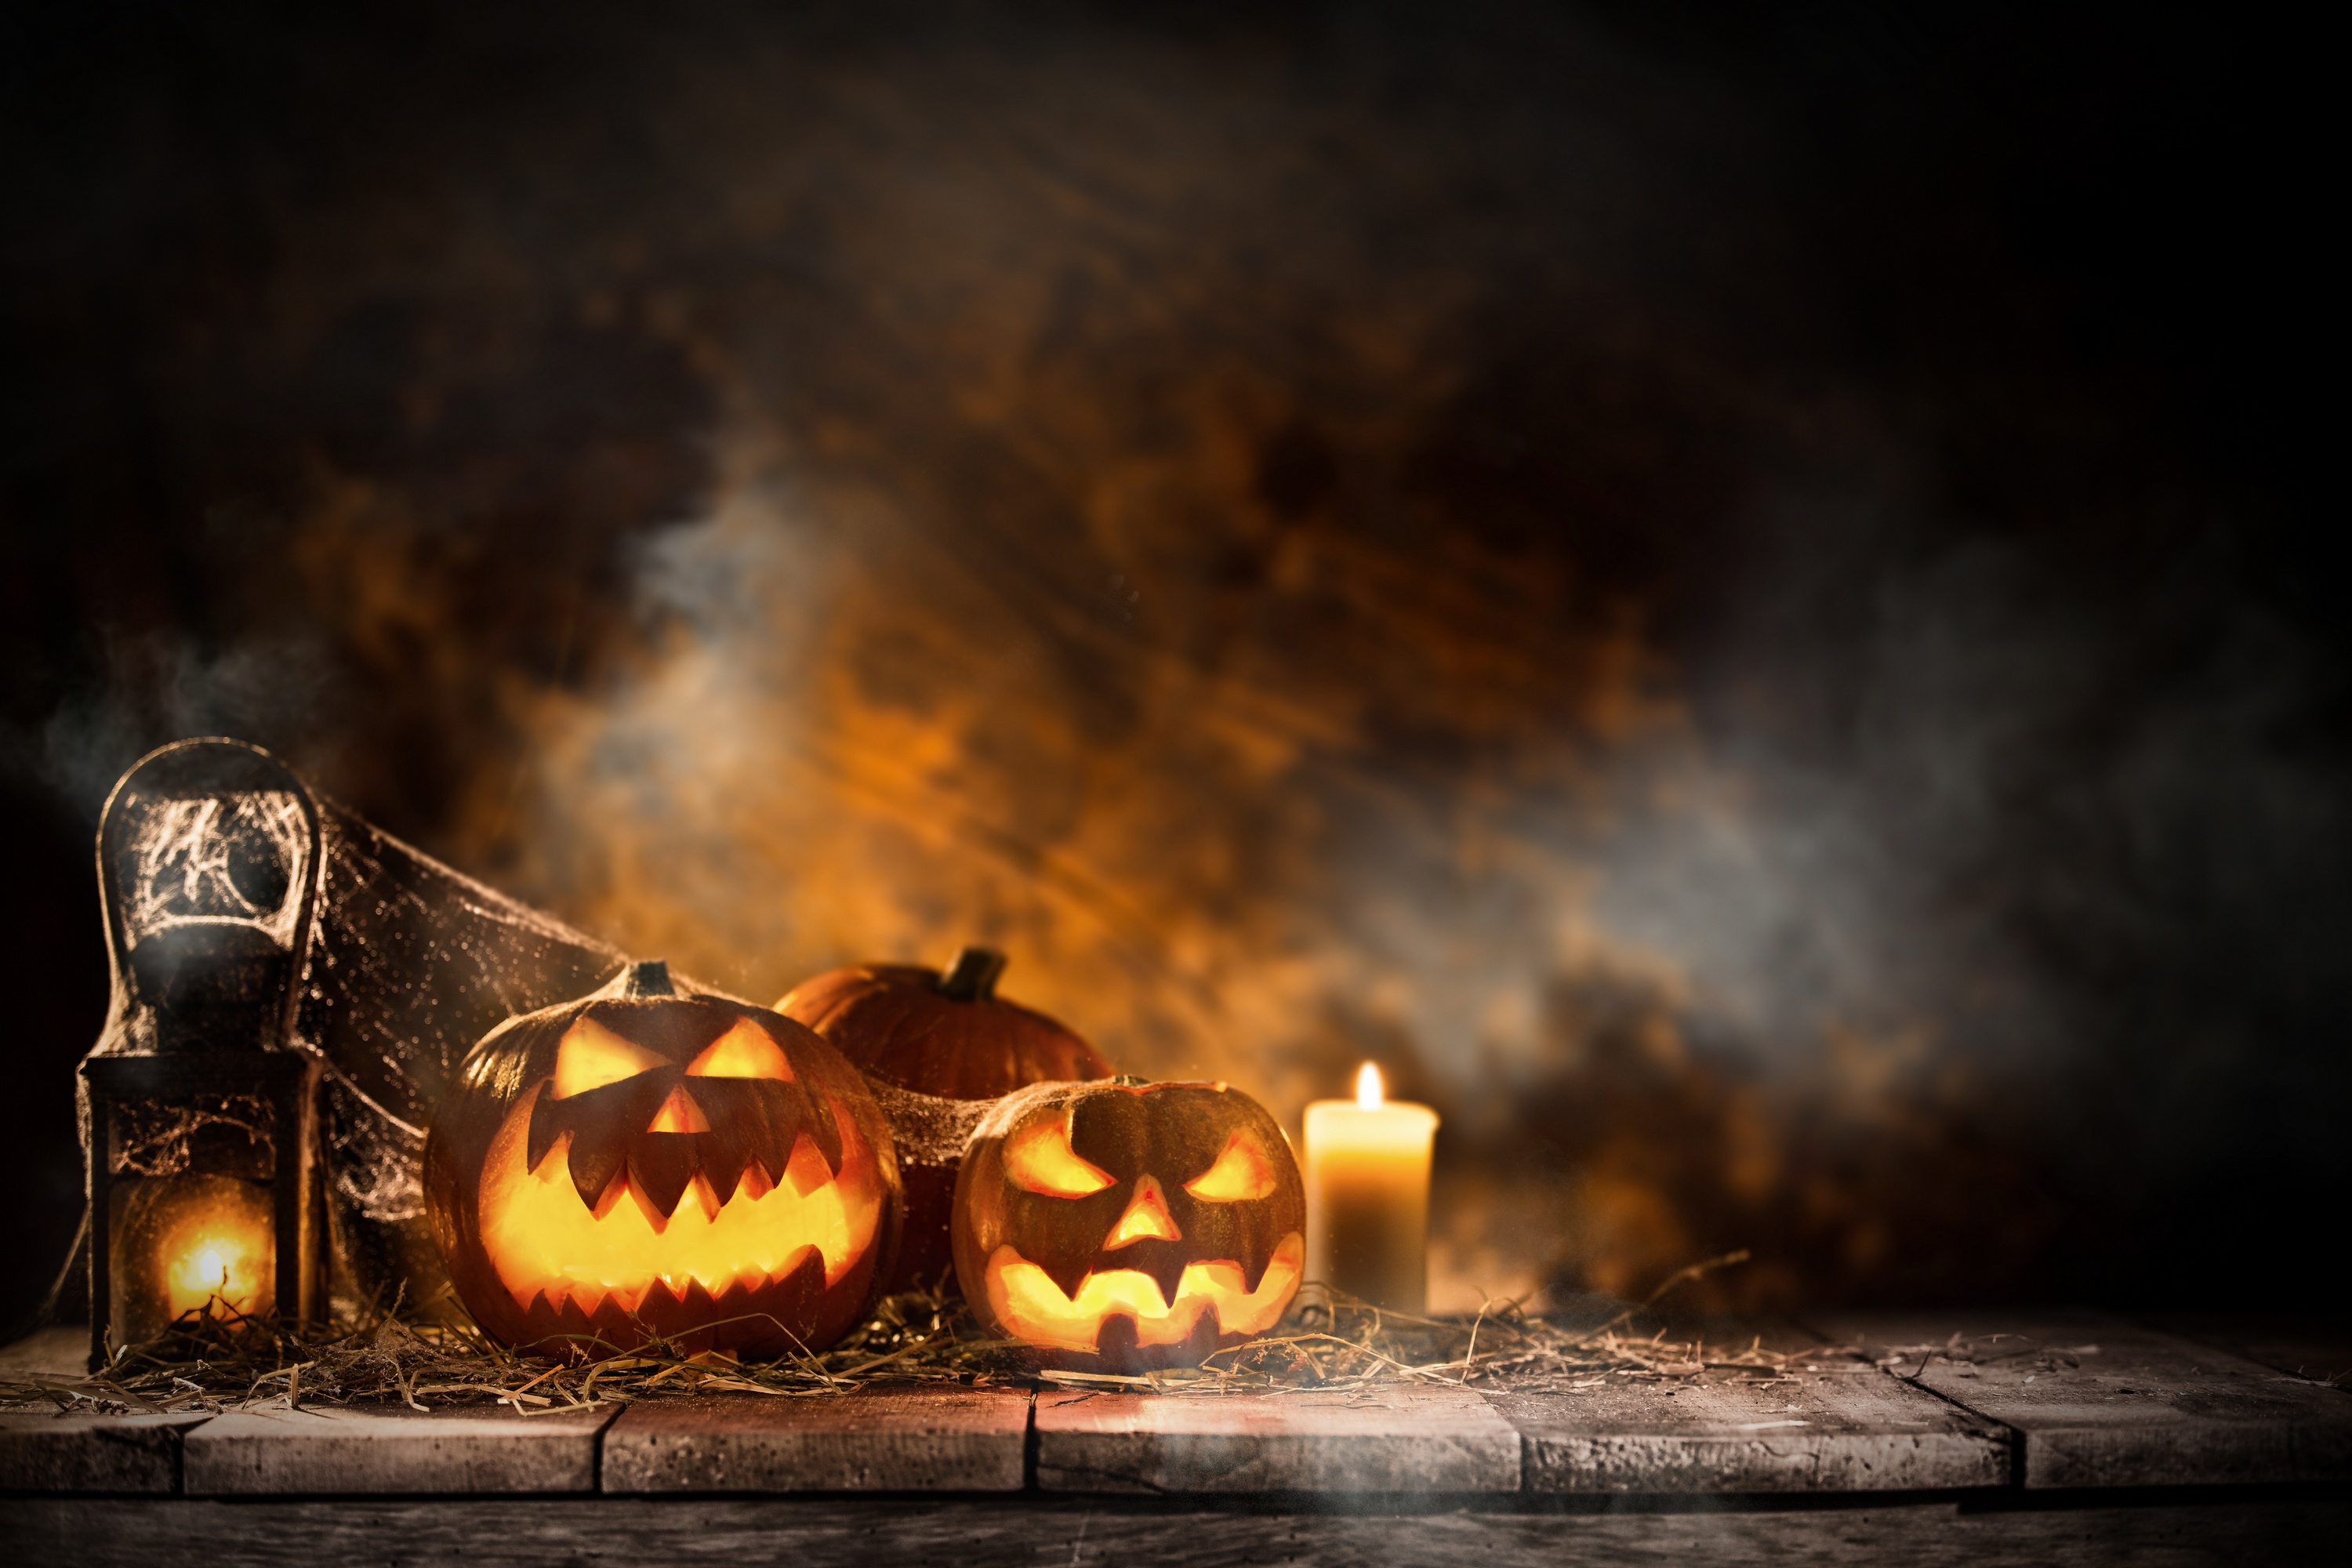 Halloween Candle And Pumpkins, HD Celebrations, 4k Wallpapers, Images, Backgrounds, Photos and 